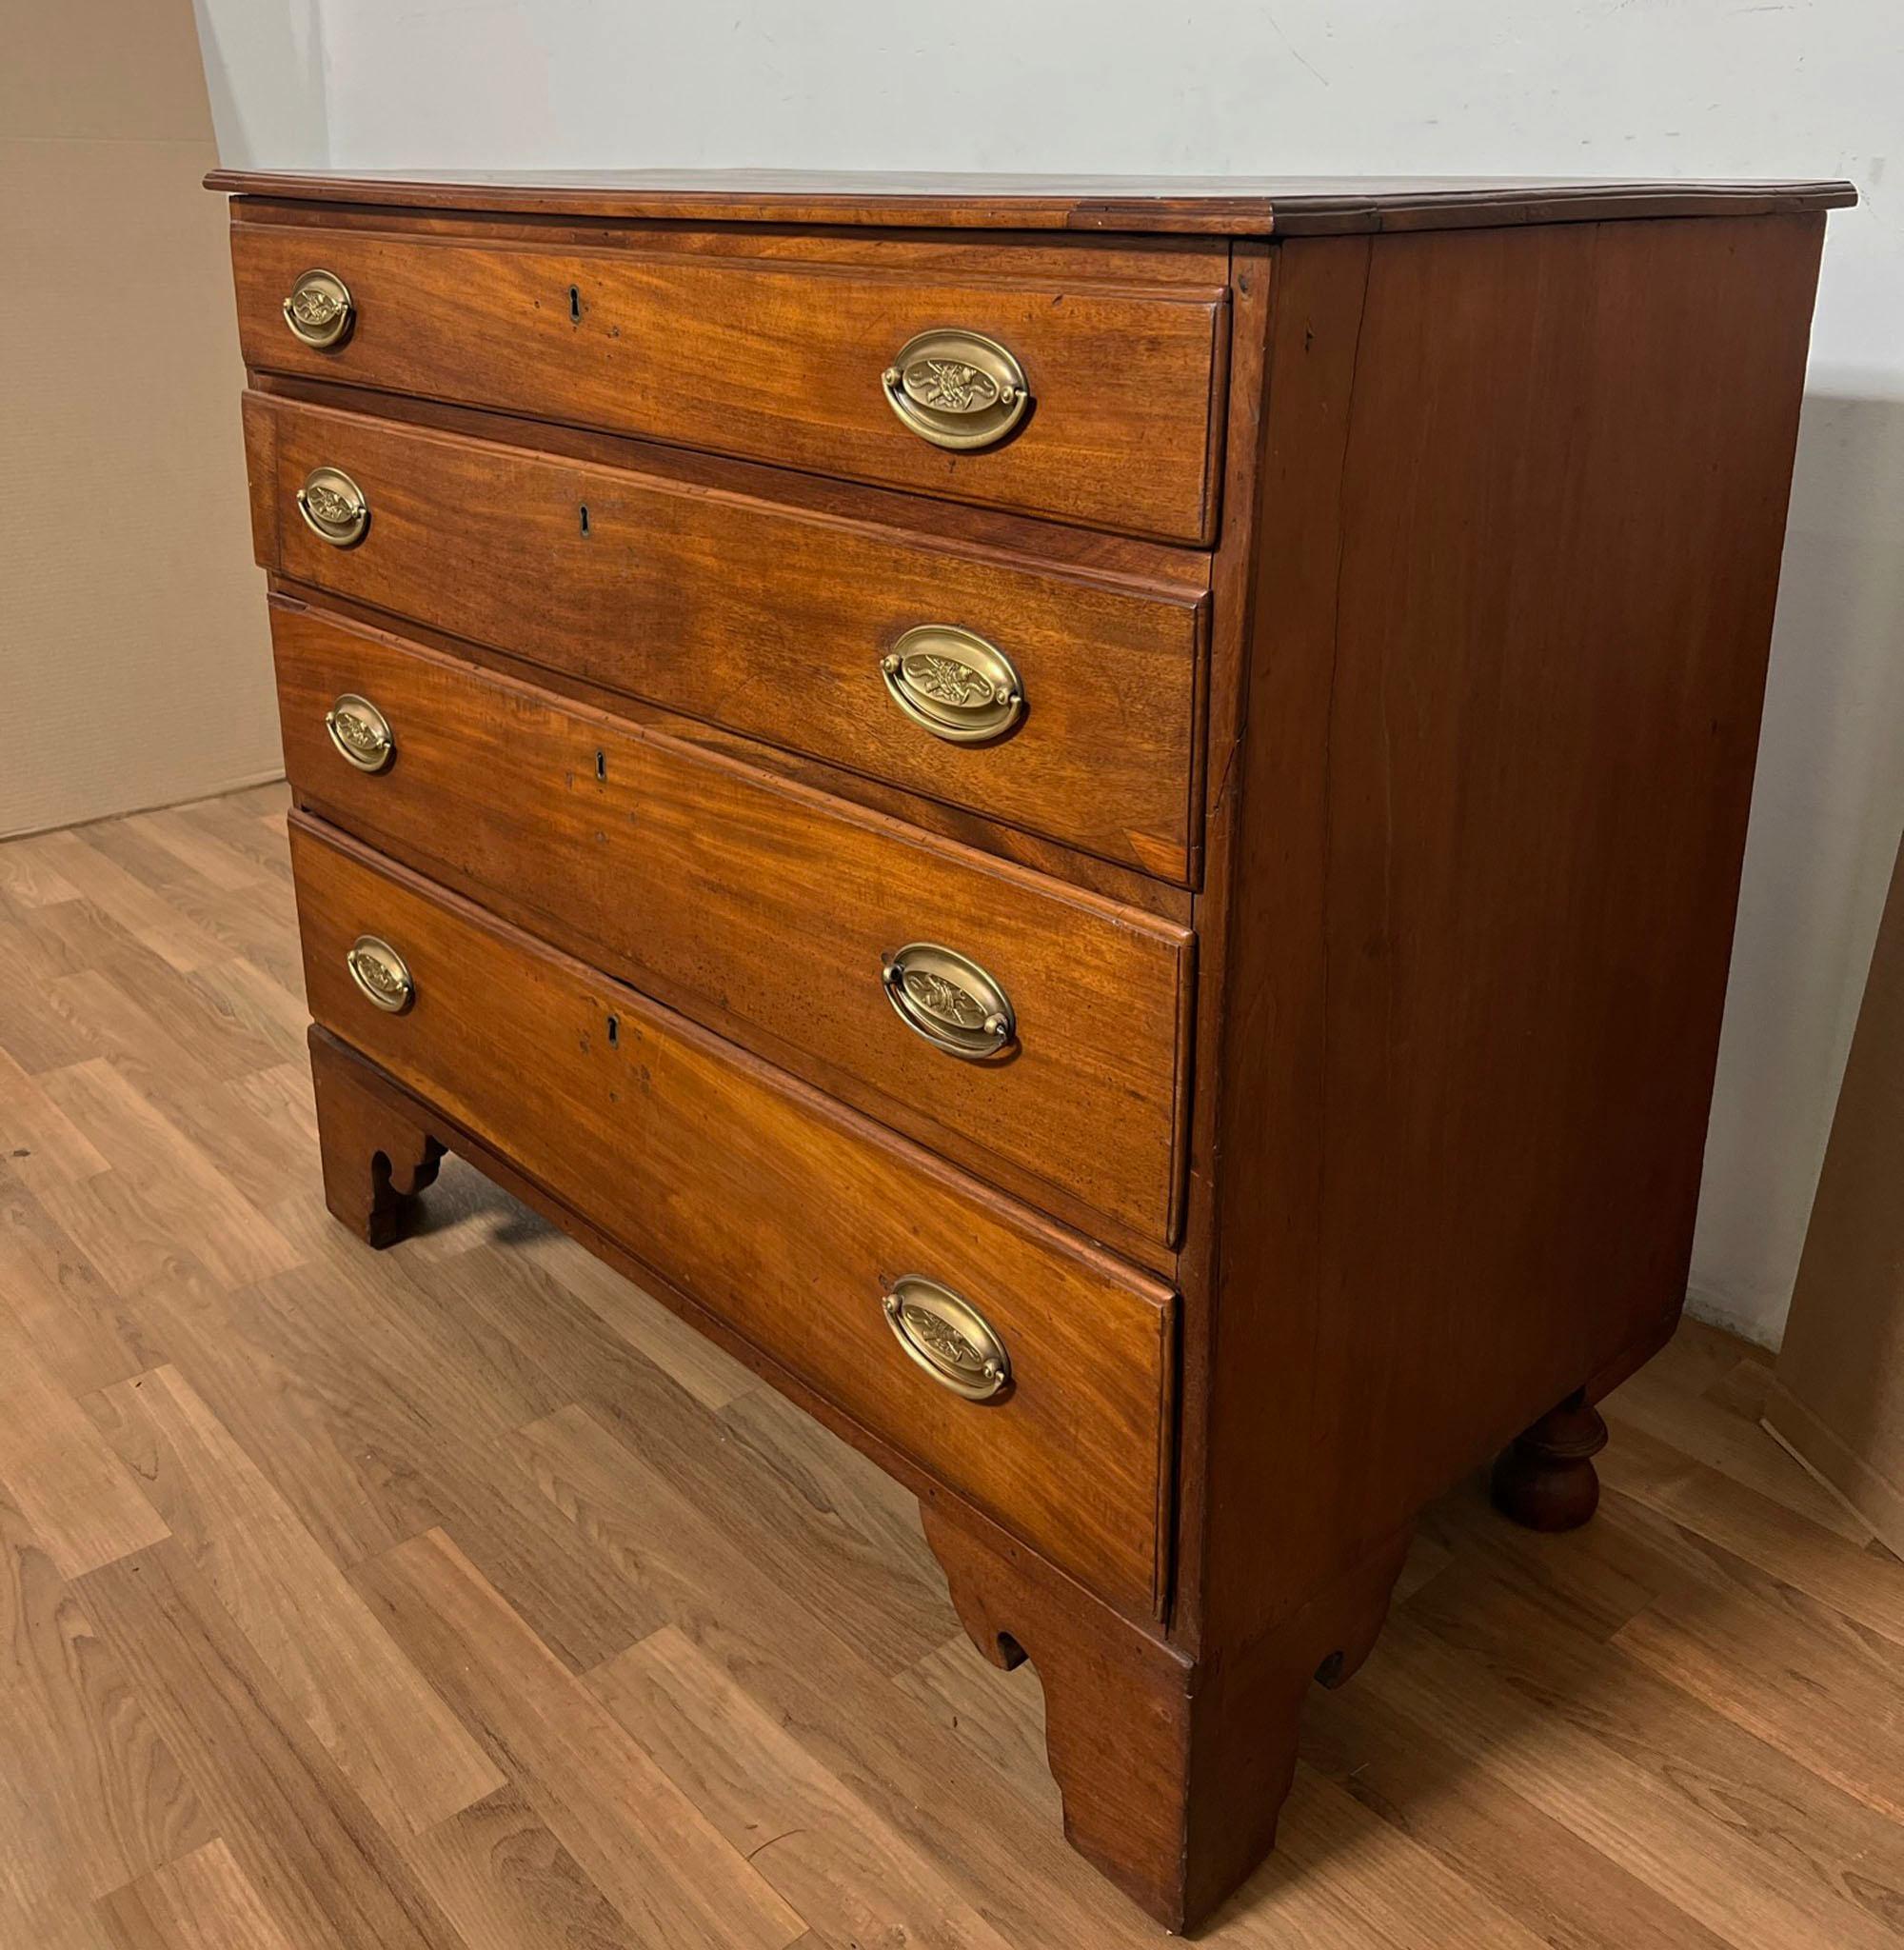 Antique American Federal period chest of four drawers in cherry over bracket feet.